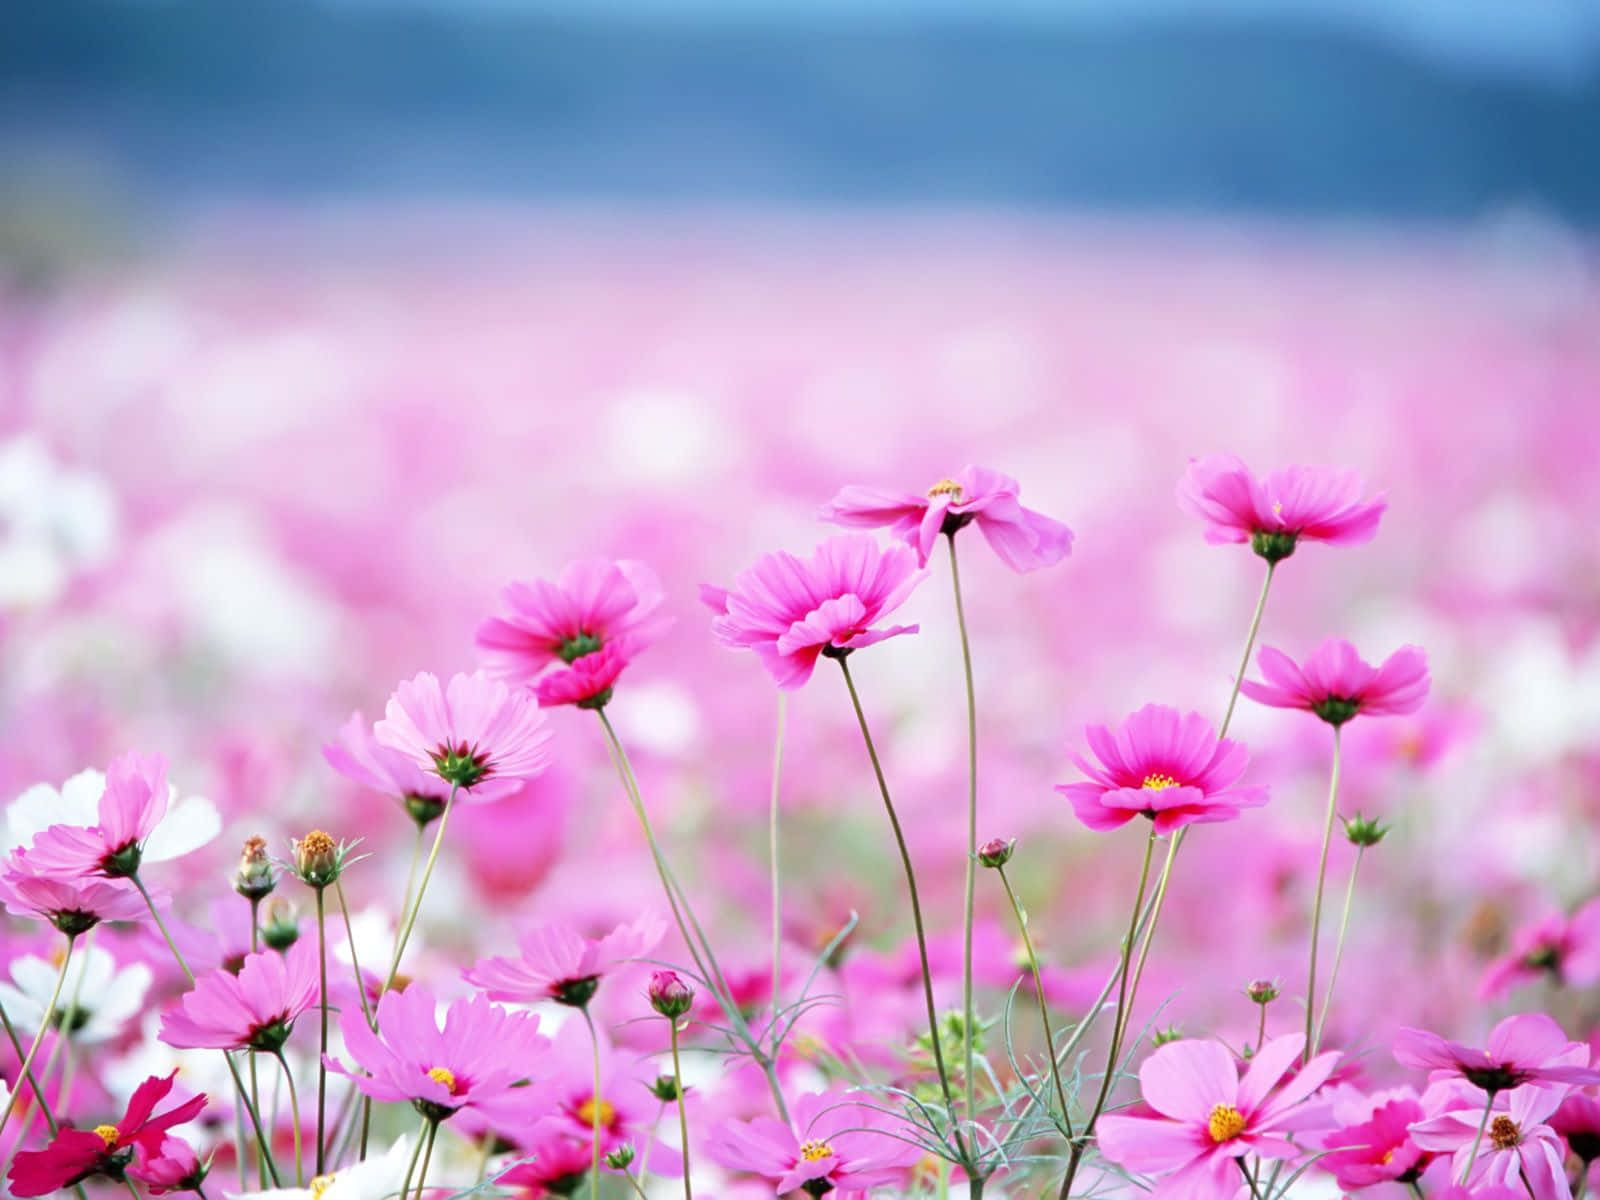 A bright field of pink flowers, perfect to brighten your day